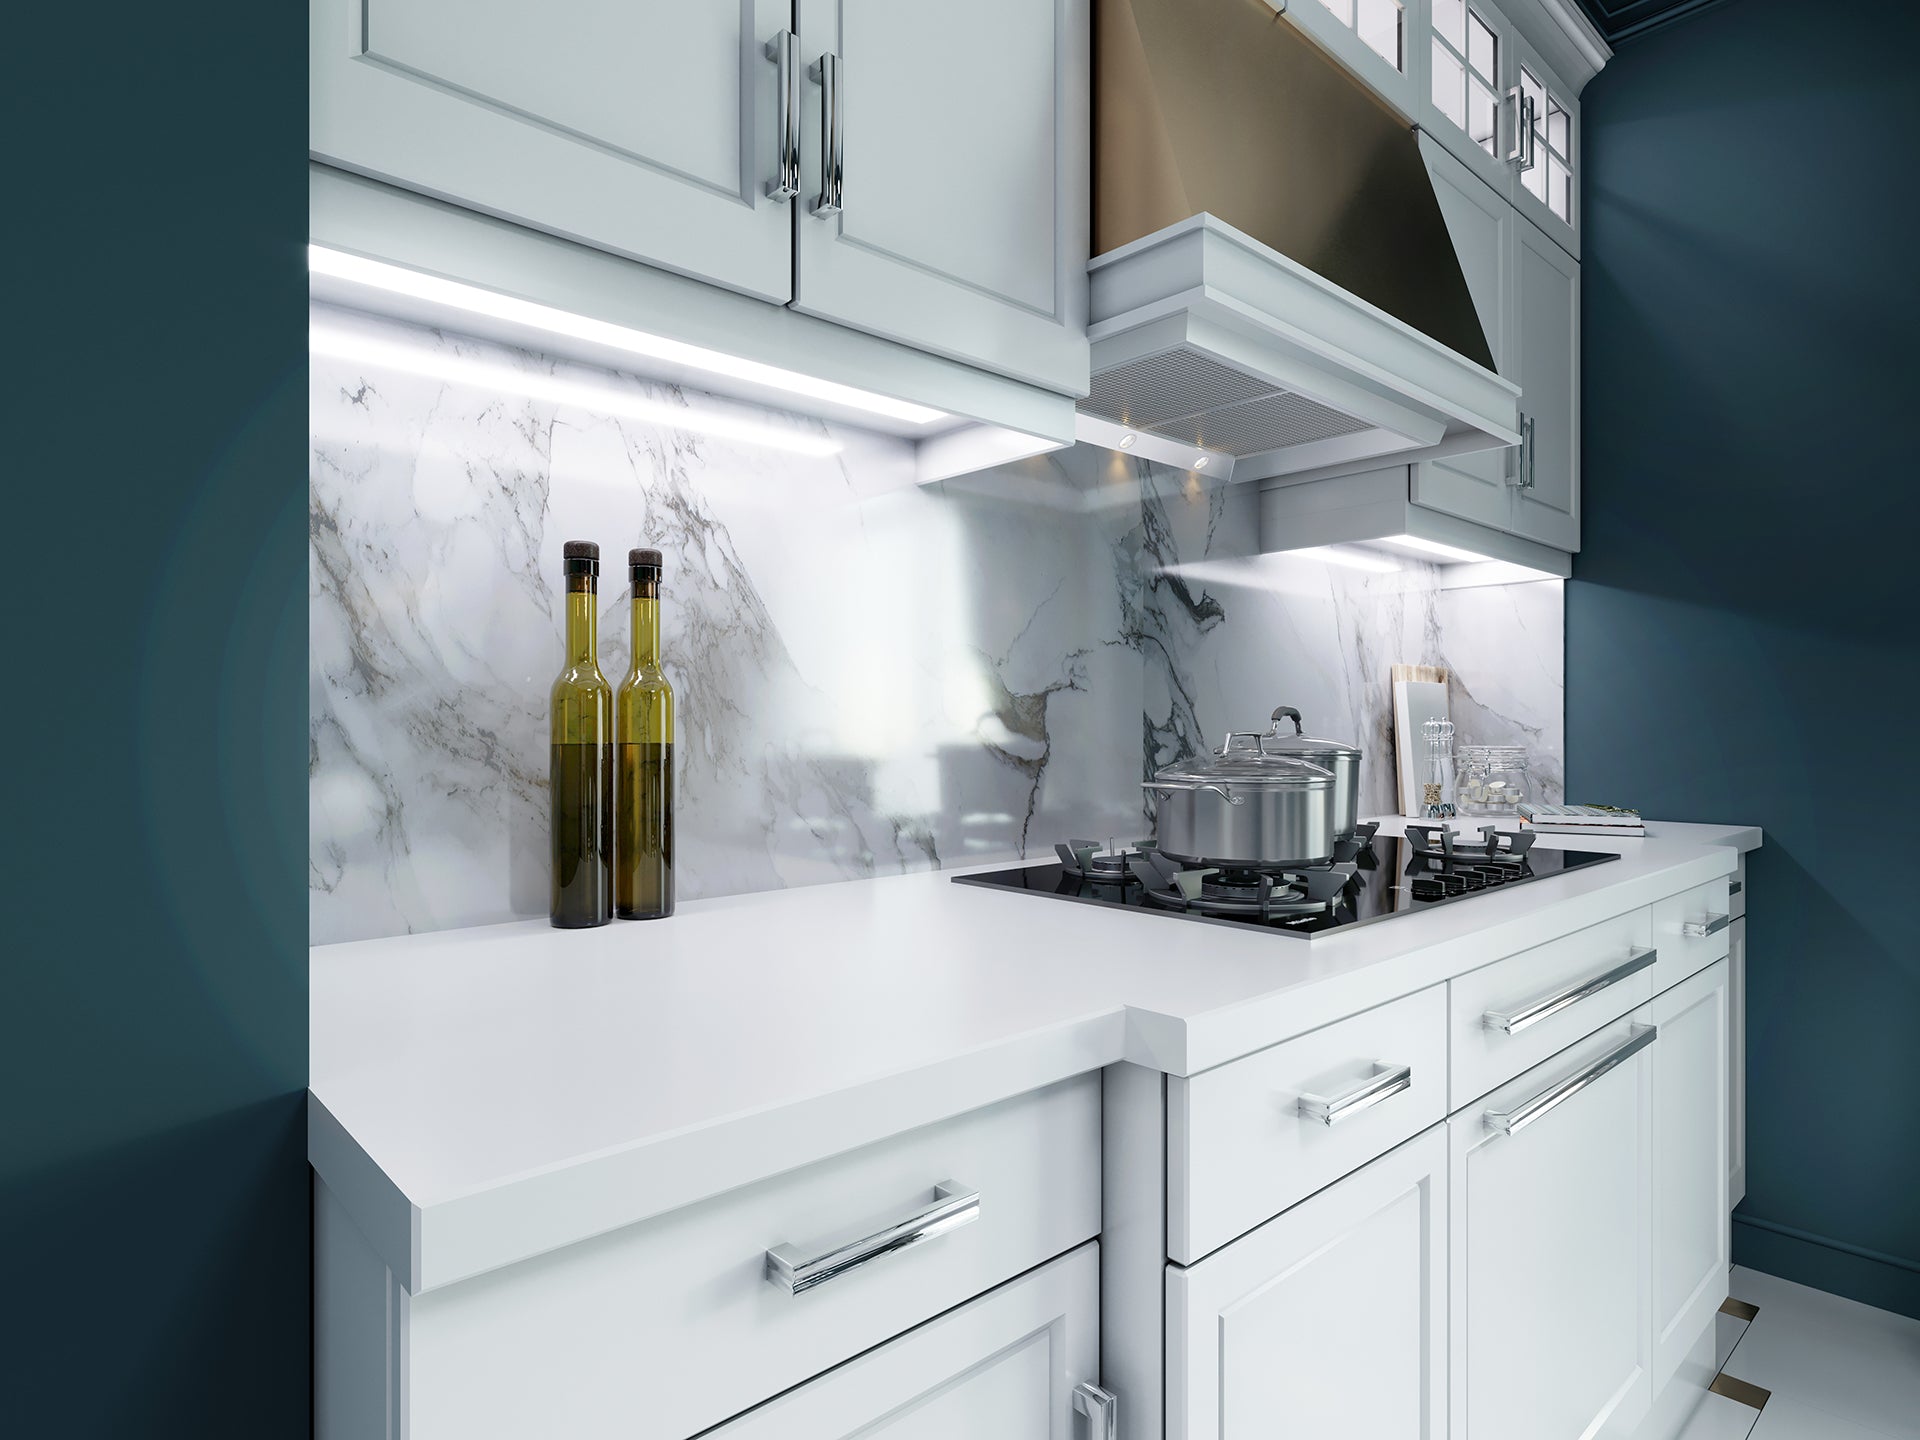 FAQs About How To Choose A Good Under Cabinet Lighting?